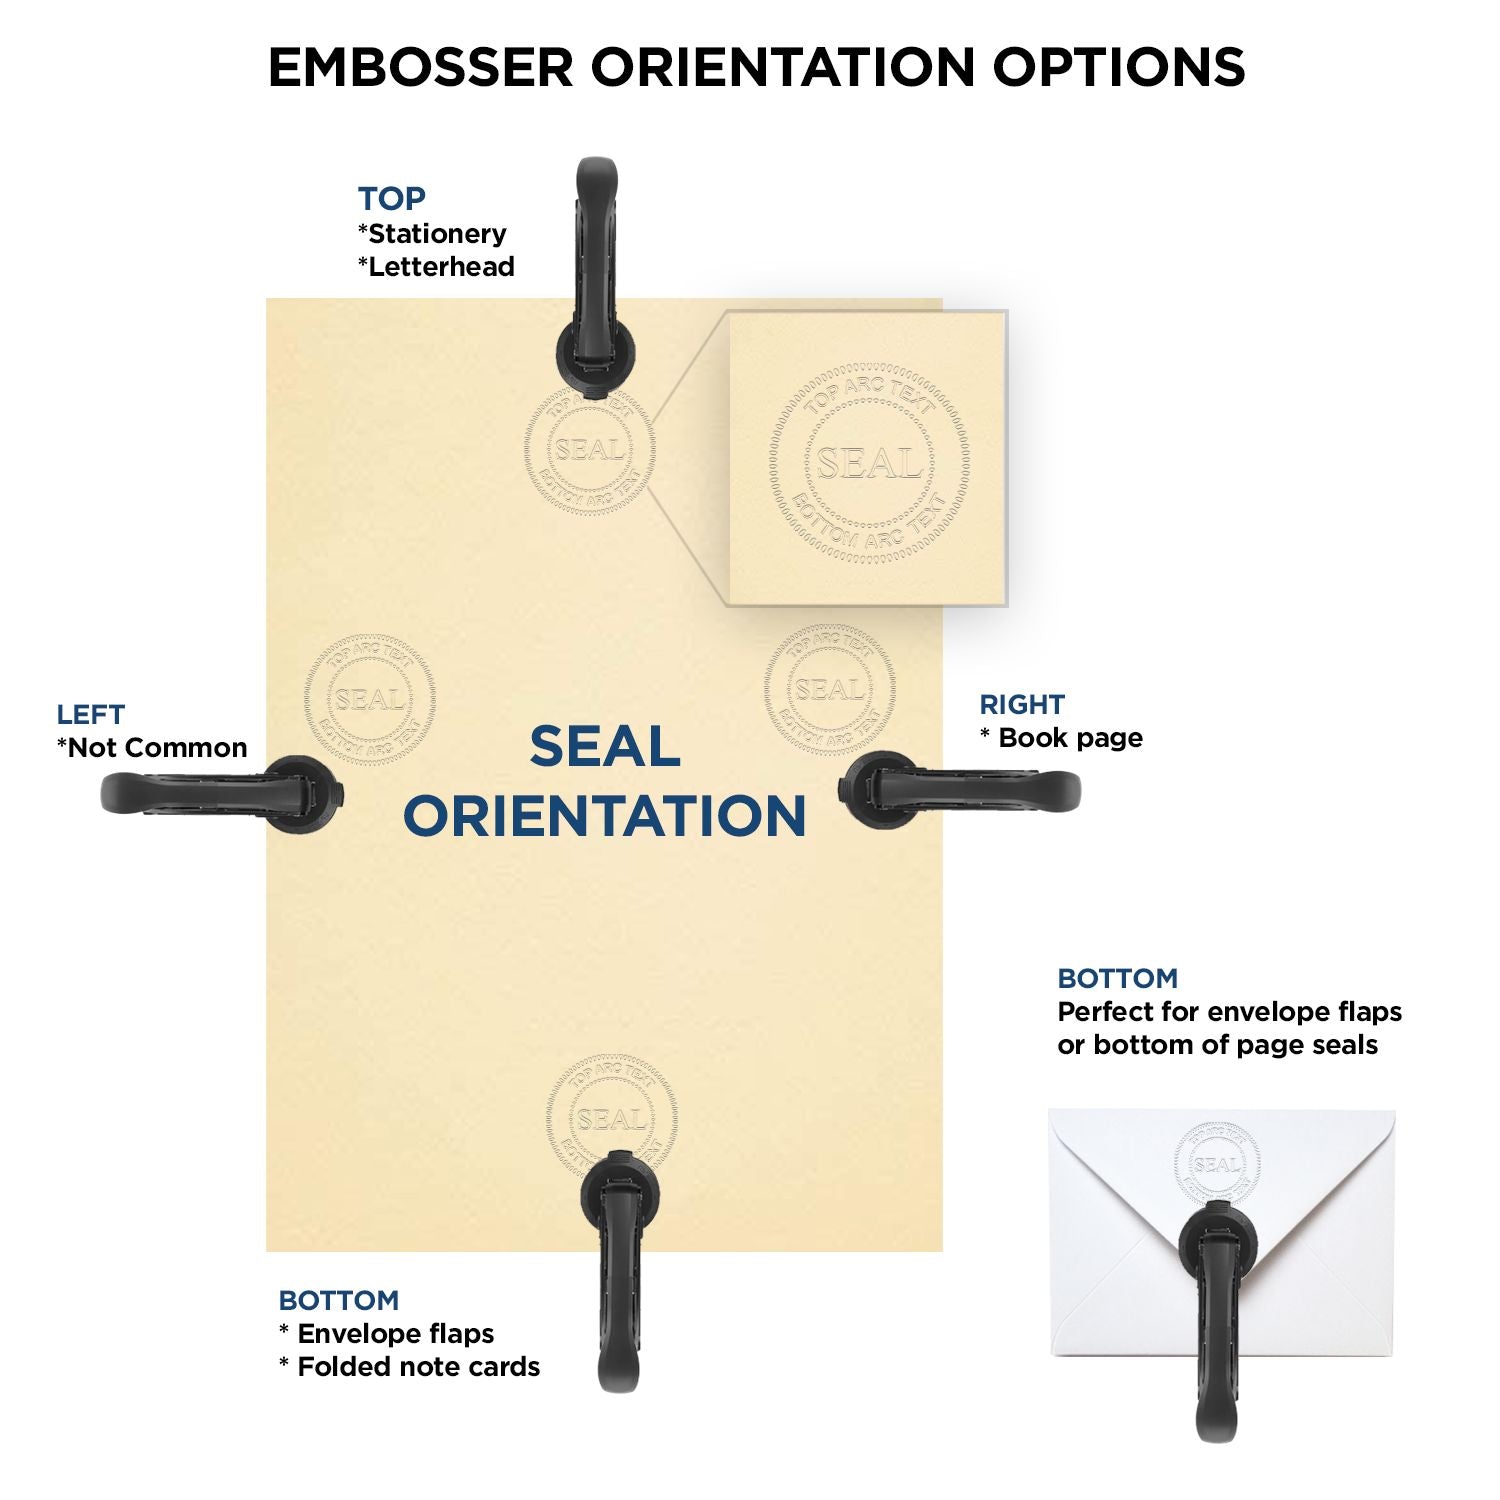 An infographic for the Connecticut Desk Landscape Architectural Seal Embosser showing embosser orientation, this is showing examples of a top, bottom, right and left insert.